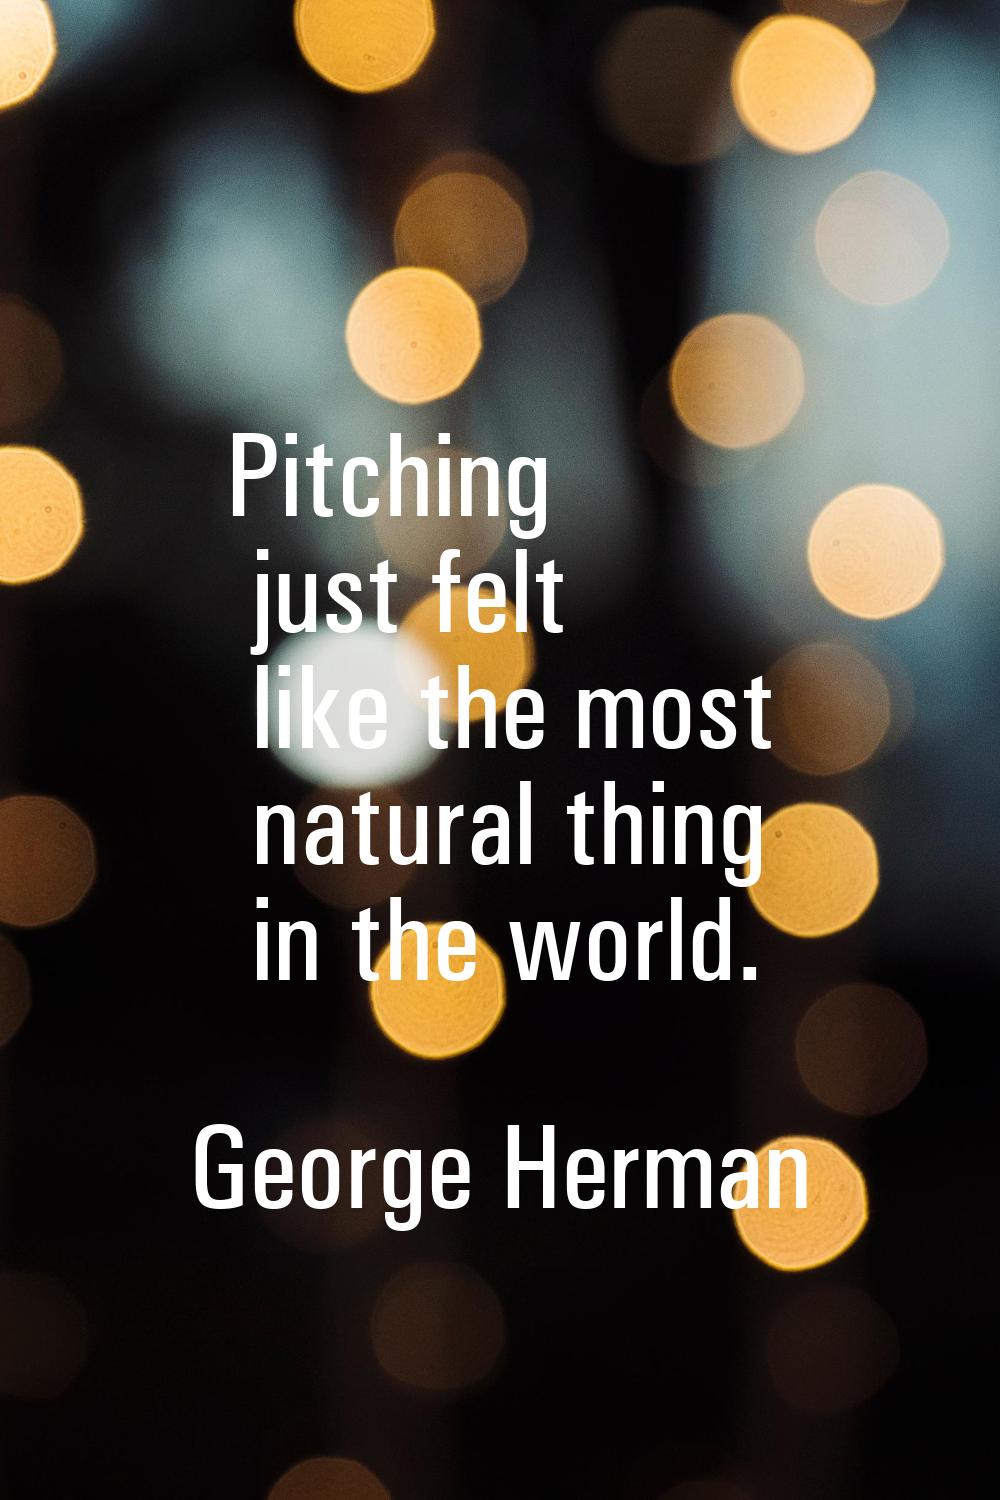 Pitching just felt like the most natural thing in the world.